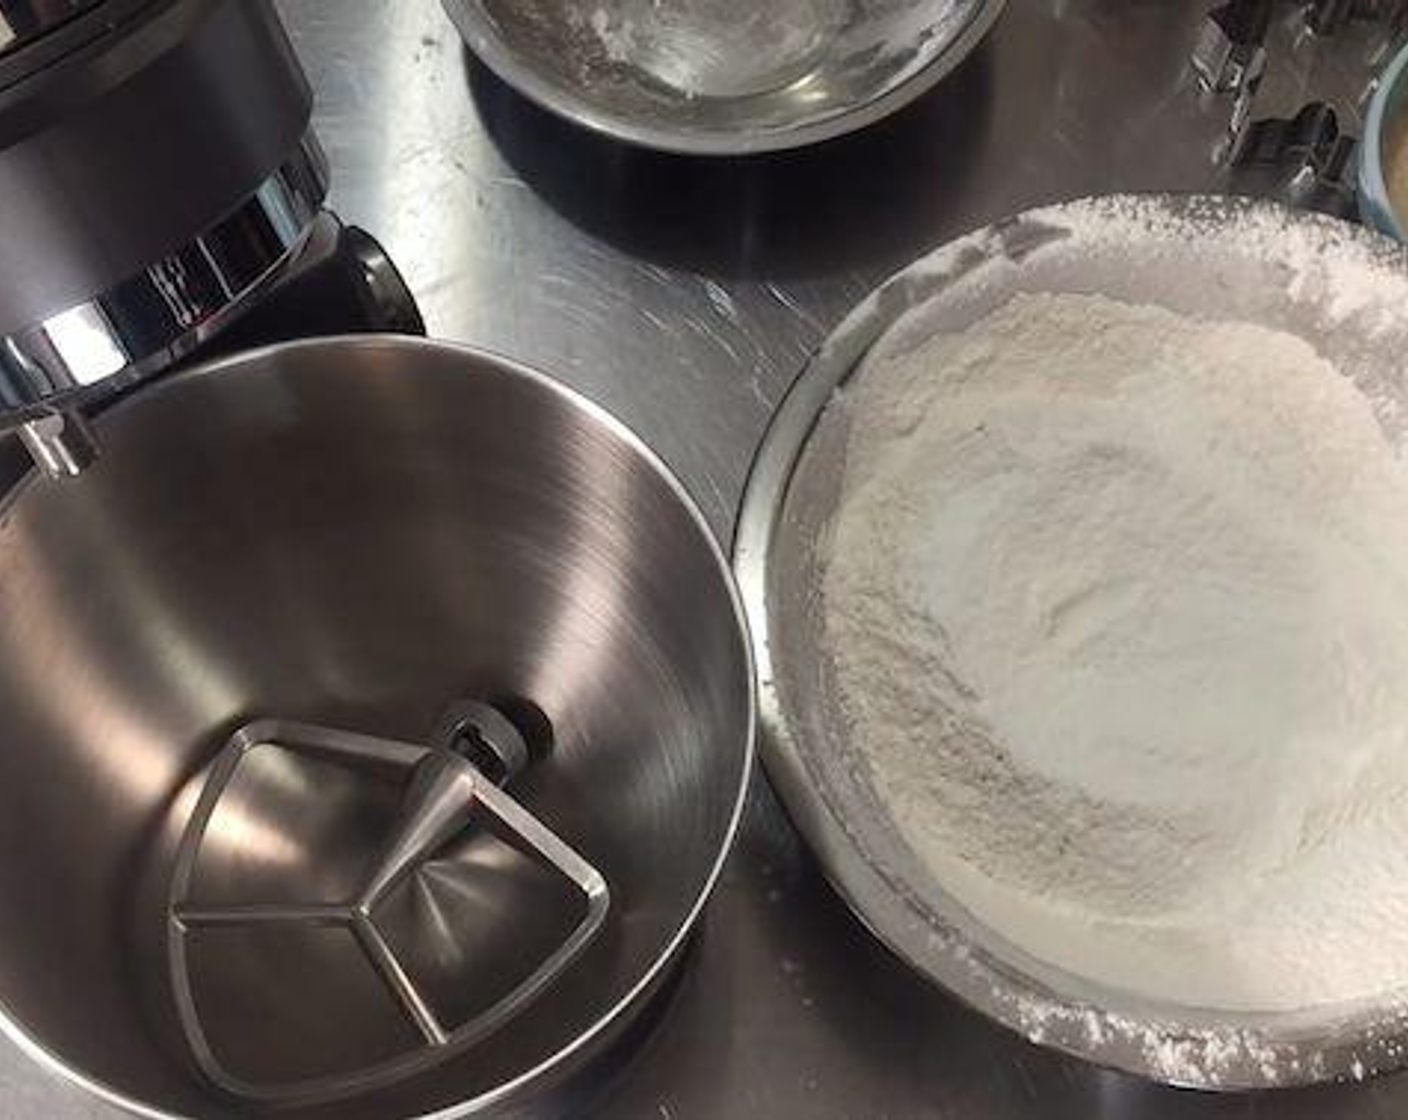 step 1 Start by sifting All-Purpose Flour (2 1/2 cups), Corn Starch (1/3 cup), and Baking Powder (1 tsp) together in a large bowl. Add Salt (1/2 tsp) and whisk all the ingredients together. Set aside.